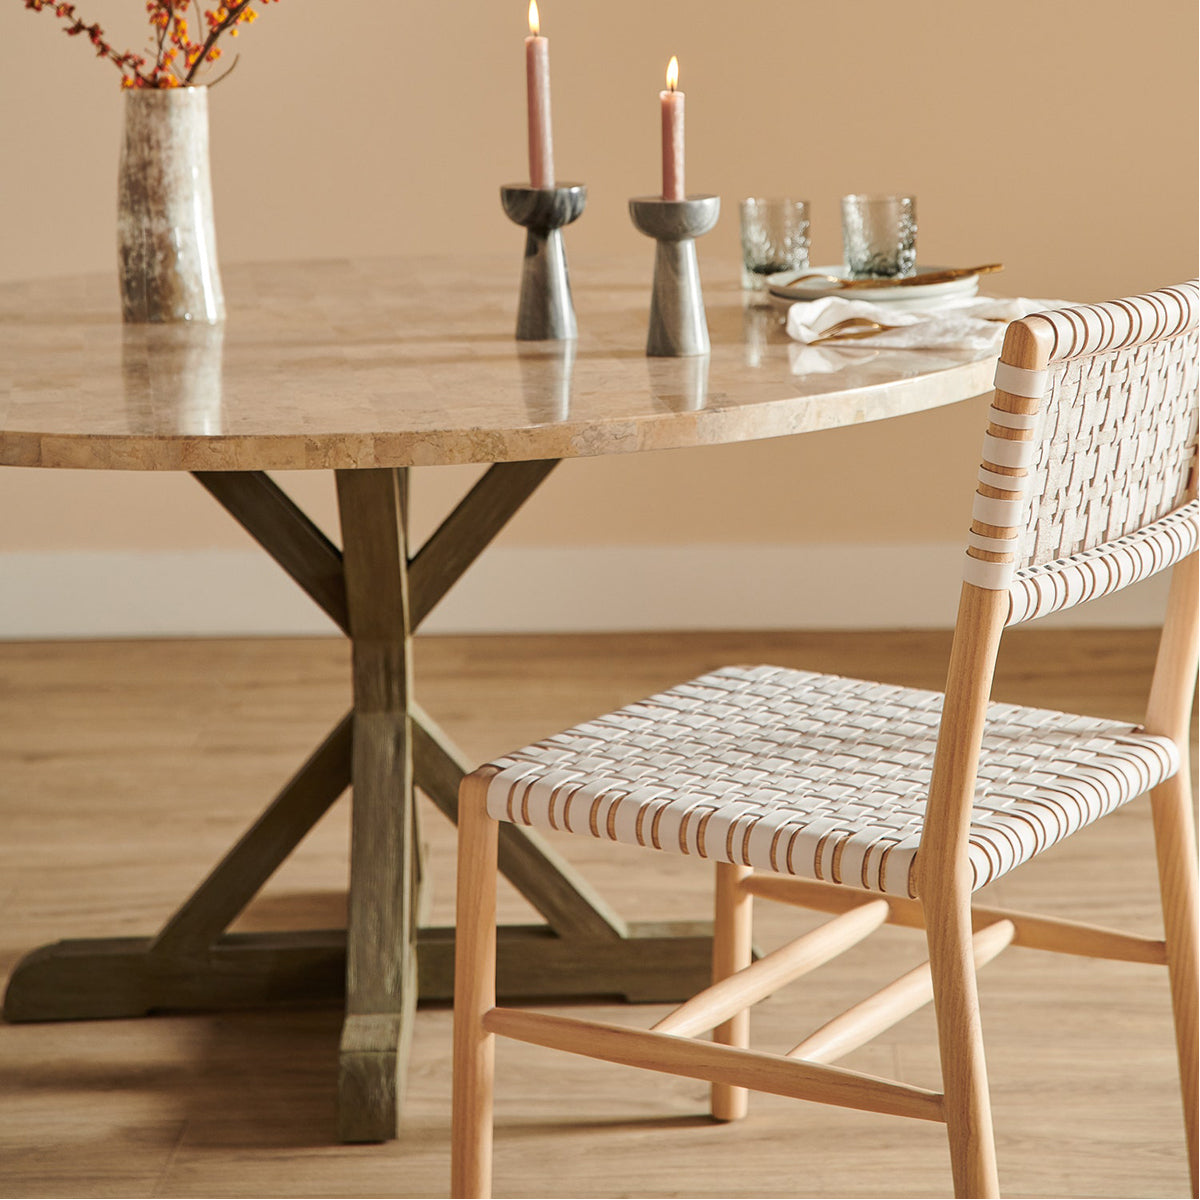 Made Goods Murray Dining Chair in Natural Mindi Wood